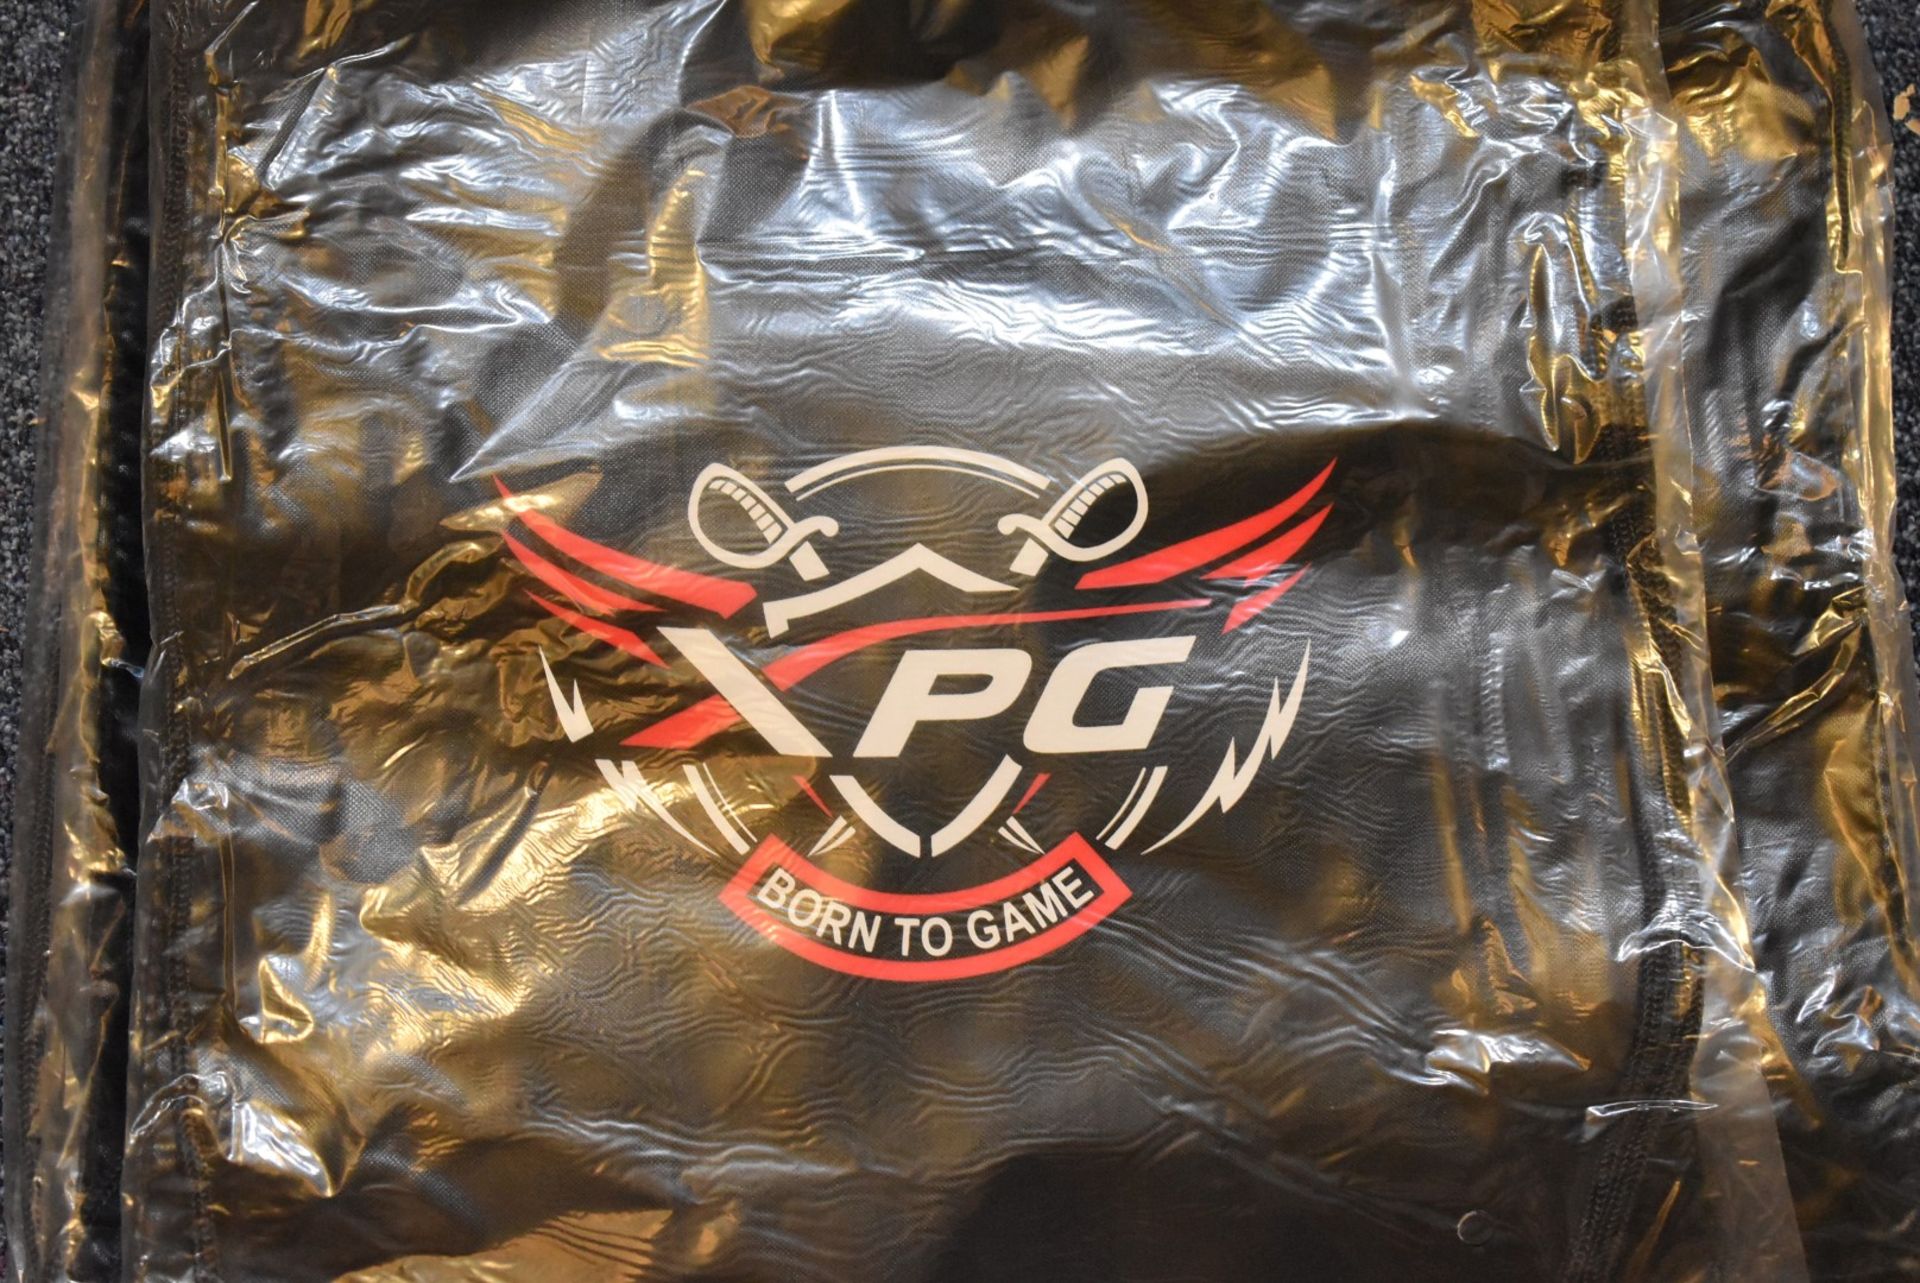 16 x XPG Born to Game Sackpack Bags - Size: 43 x 35 cms - New in Packets - Image 3 of 3